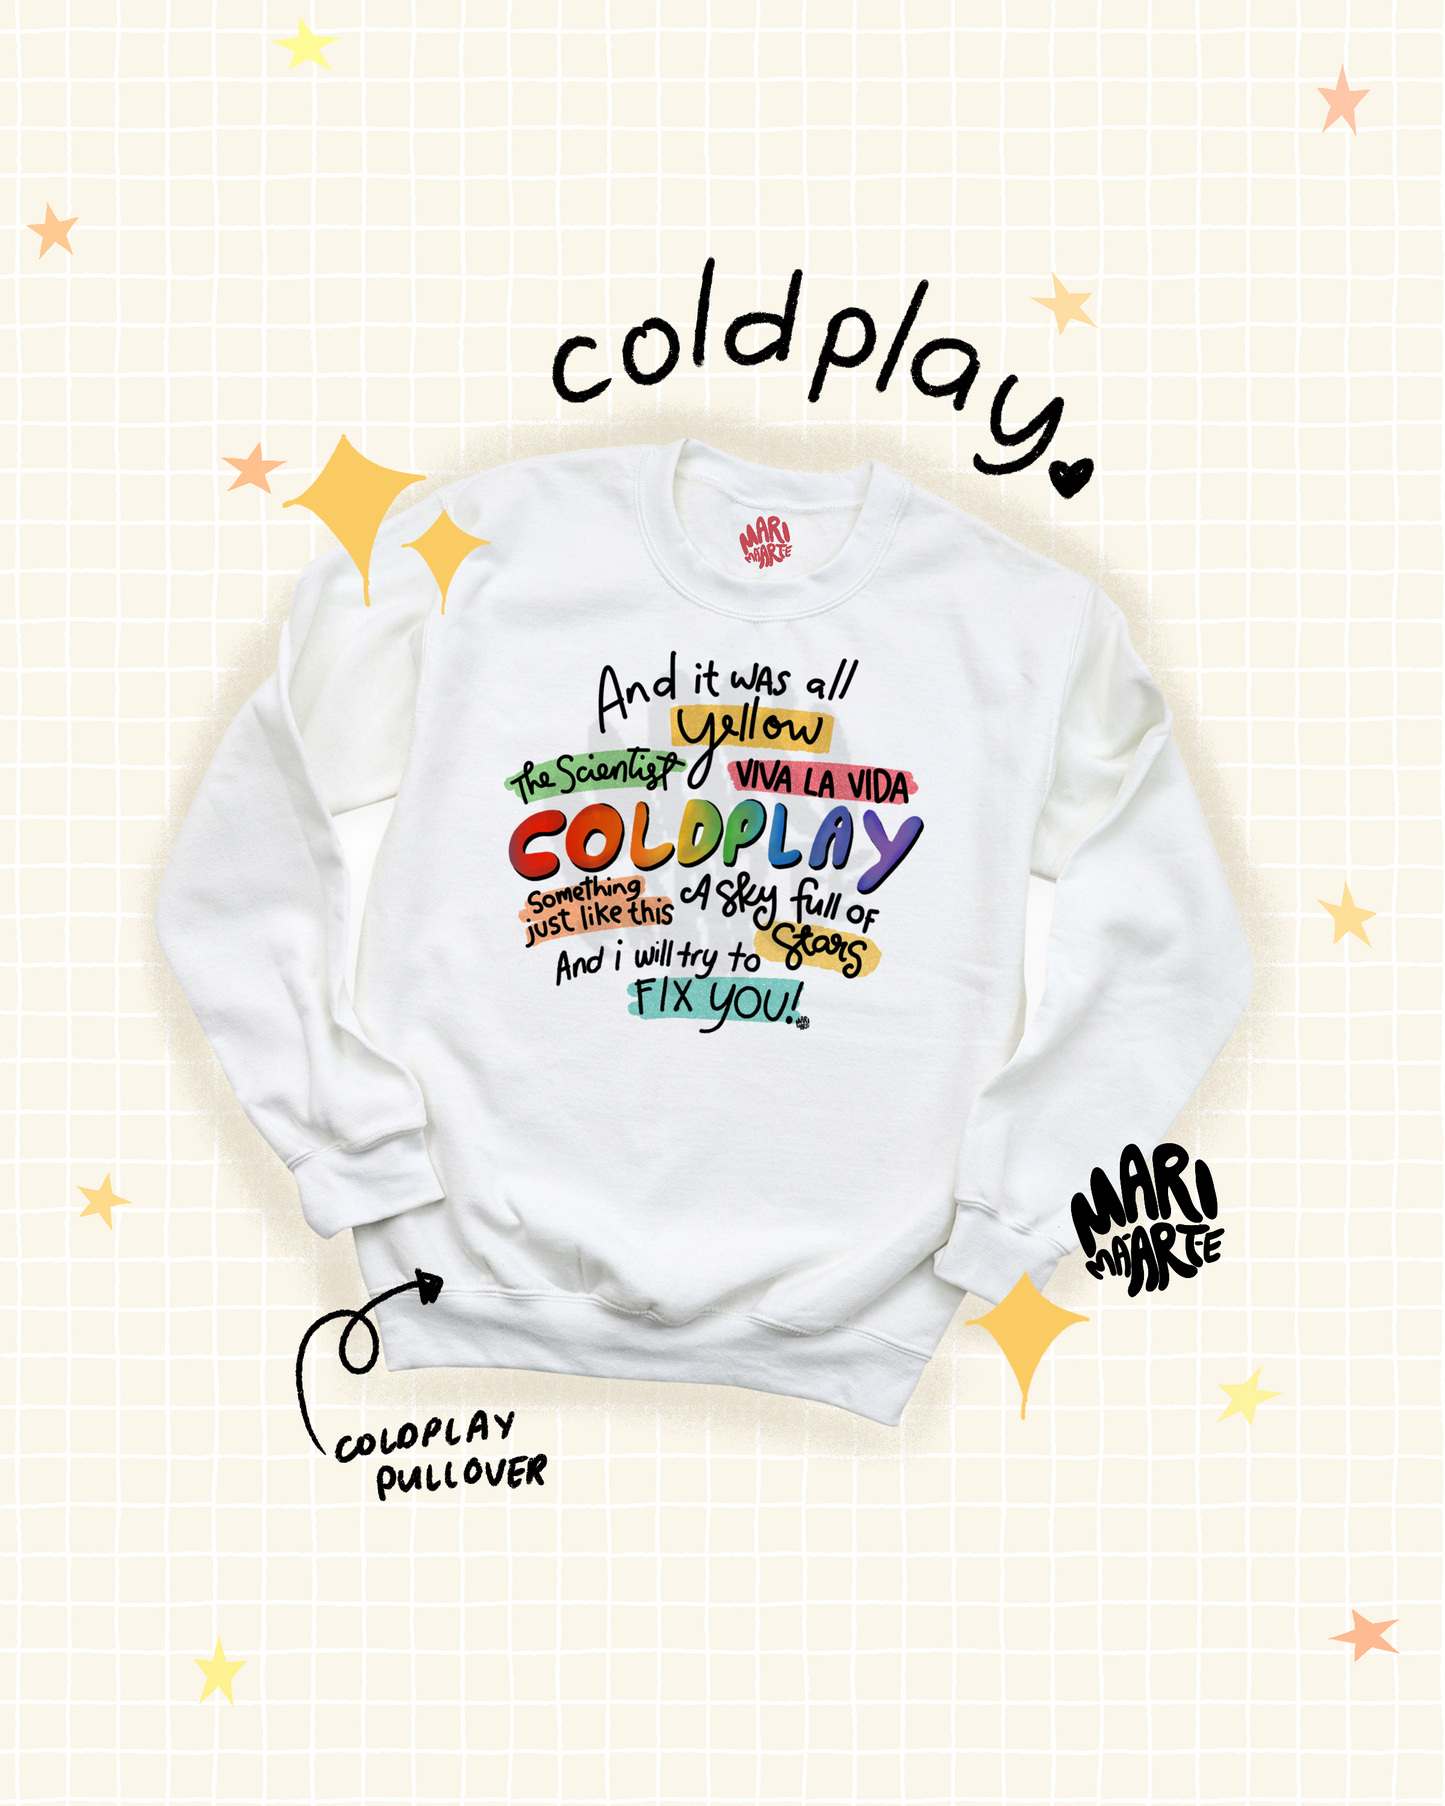 COLDPLAY PULLOVER or HOODIE no